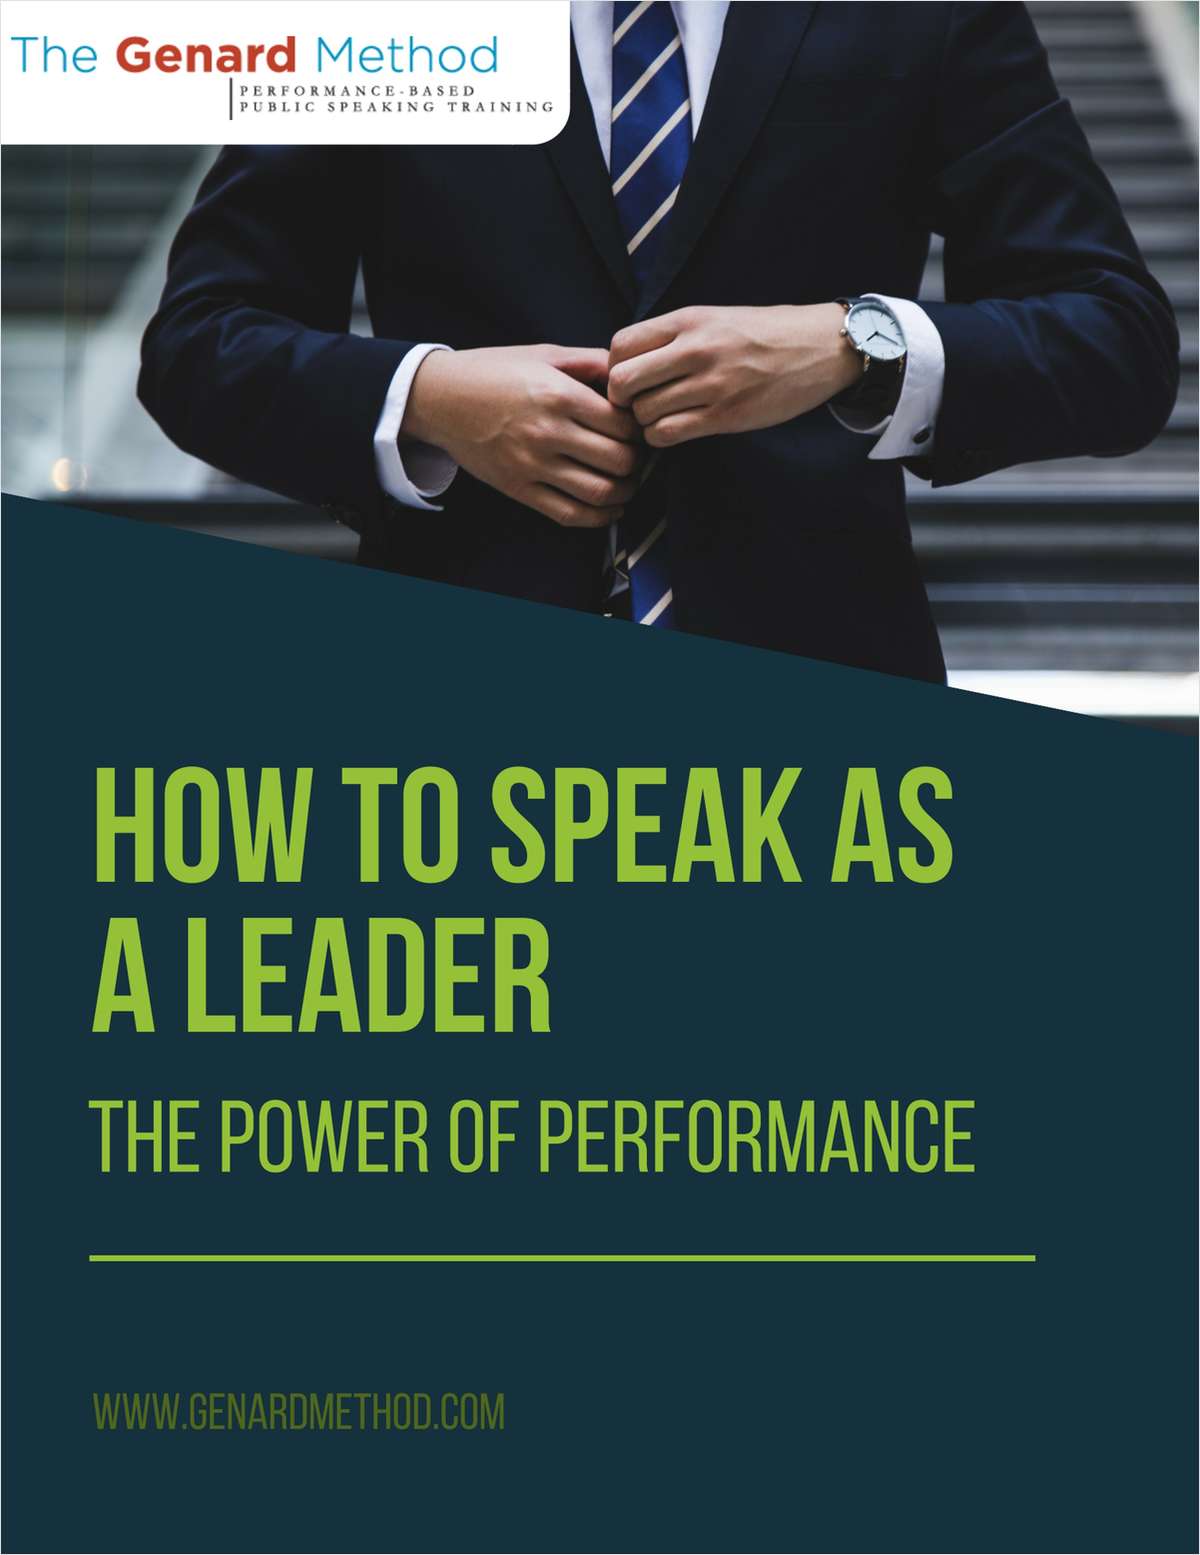 How To Speak as a Leader - The Power of Performance